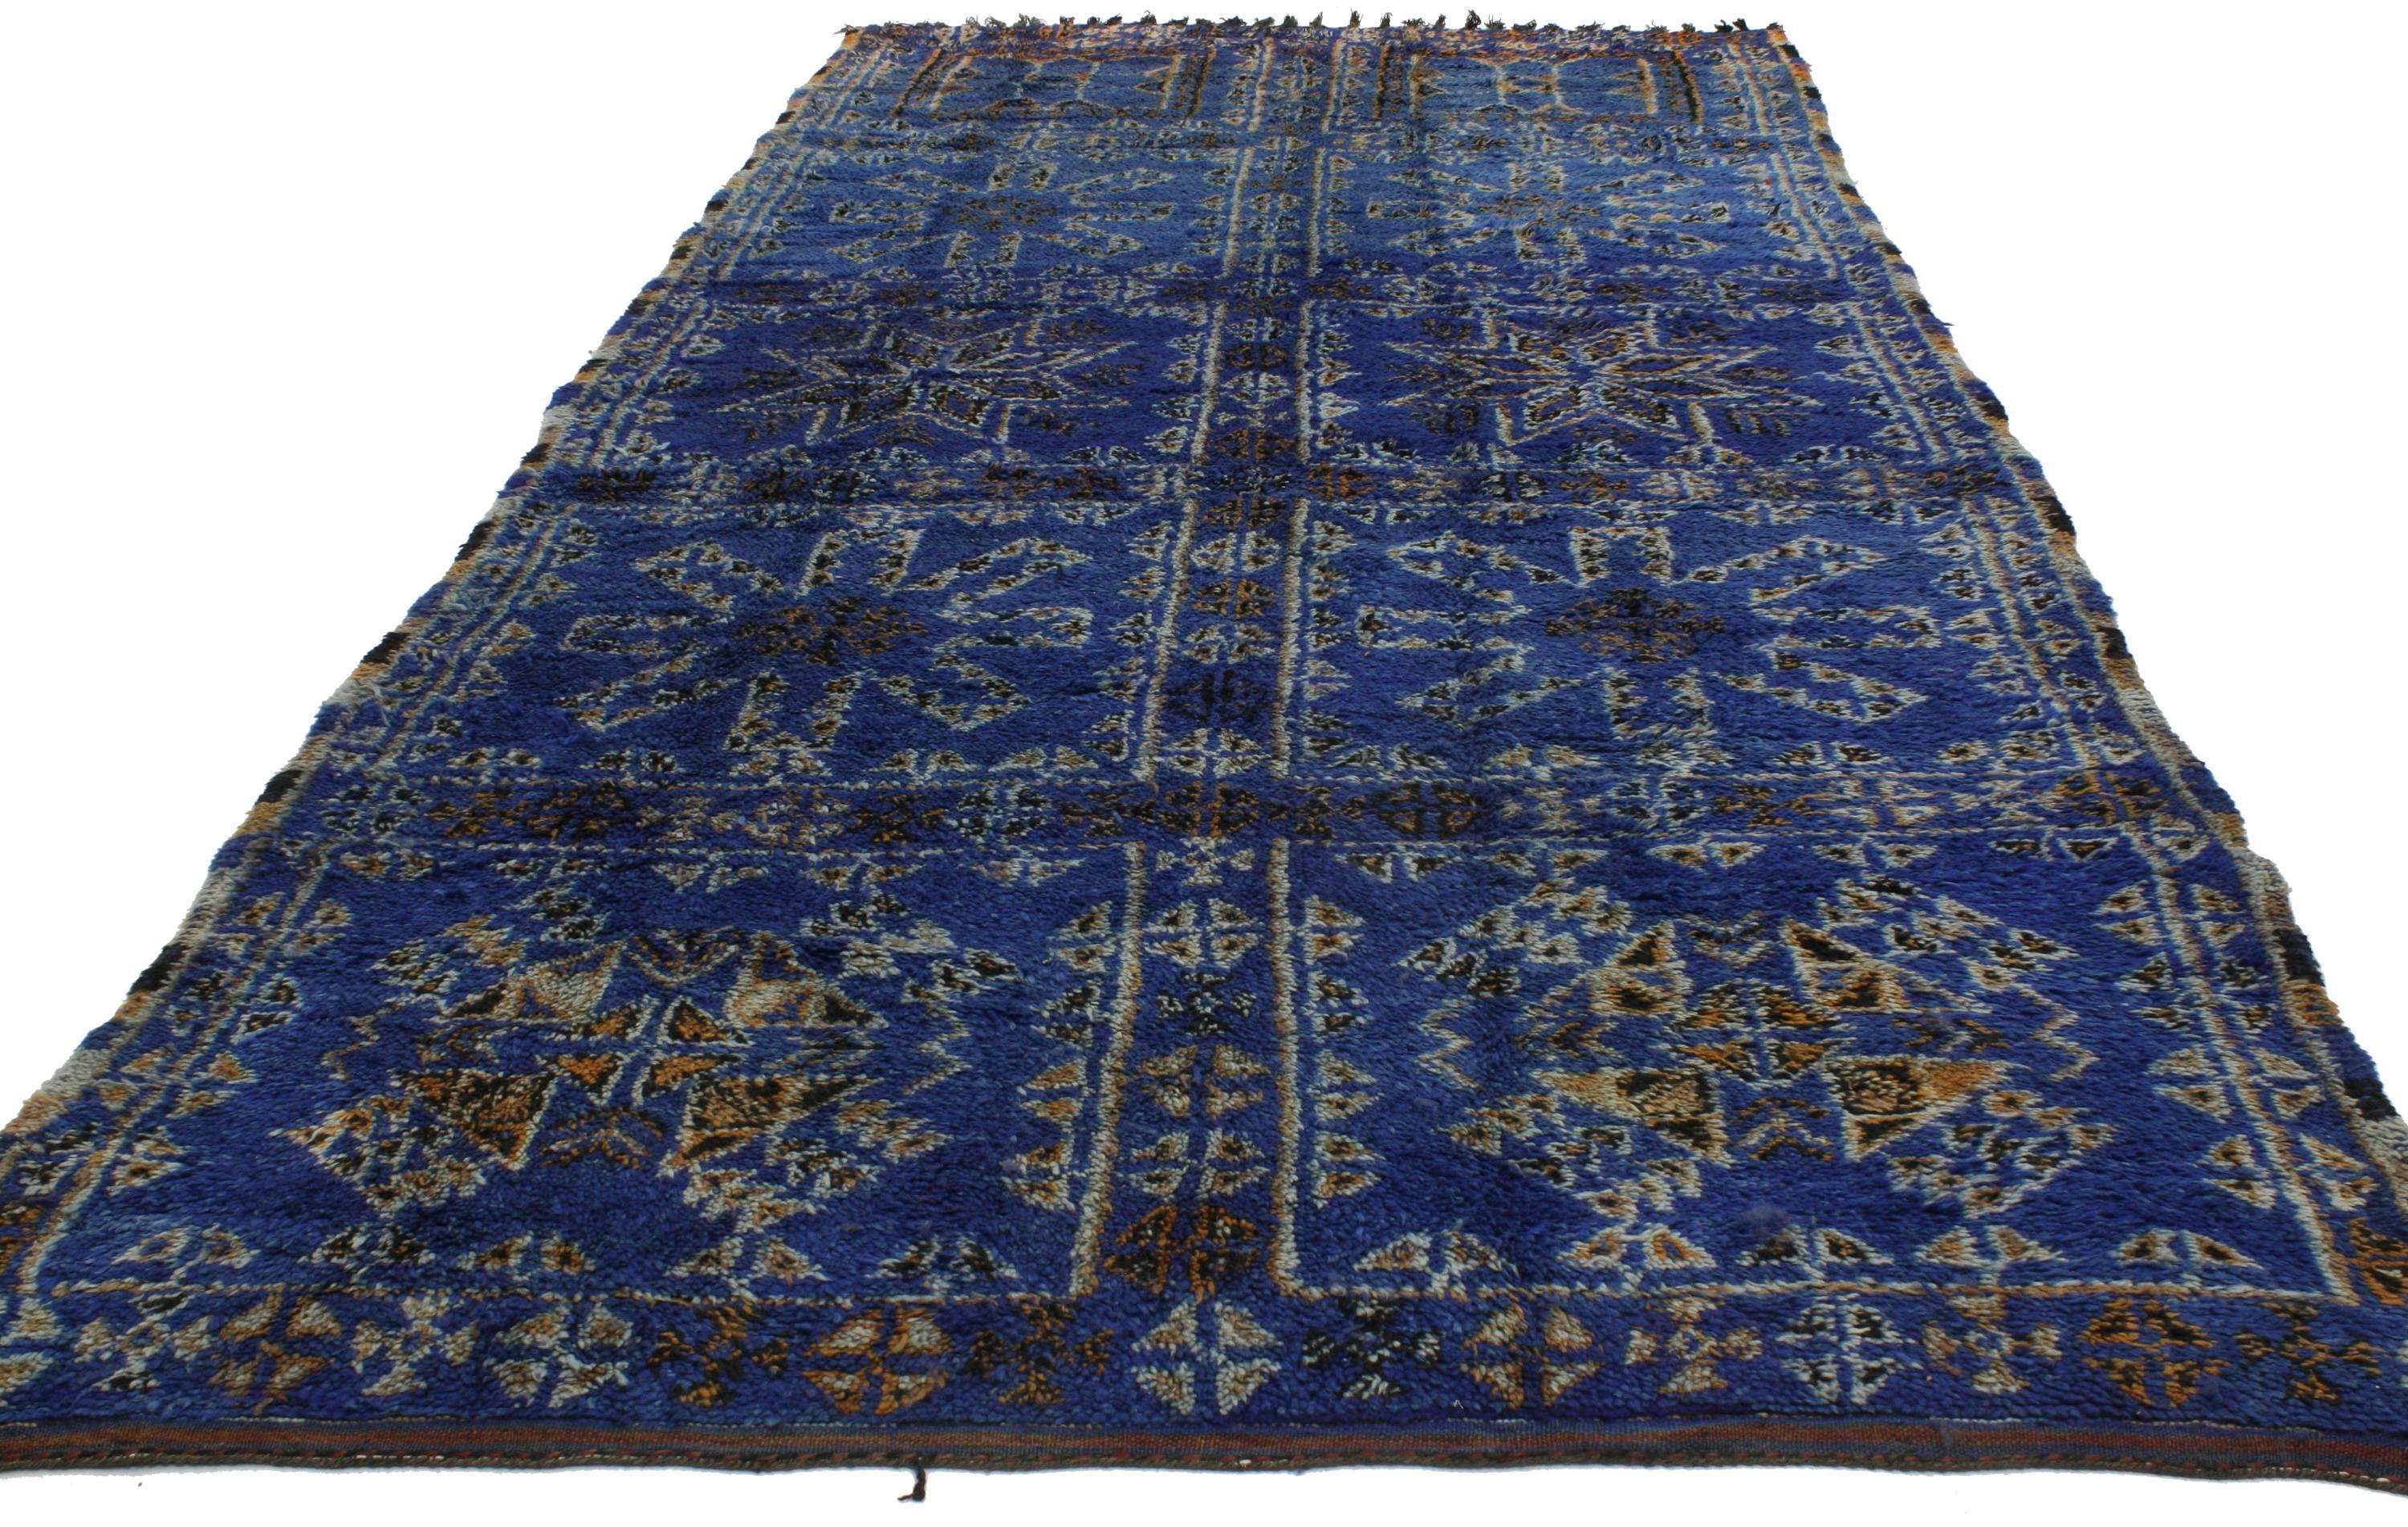 Featuring a saturated palette of cobalt blue, this plush piled vintage Moroccan rug by Beni Ouarain carpet embodies a youthful and whimsical vibe with its tribal style and Berber Tribe history. Features ancient tribal motifs enclosed in individual